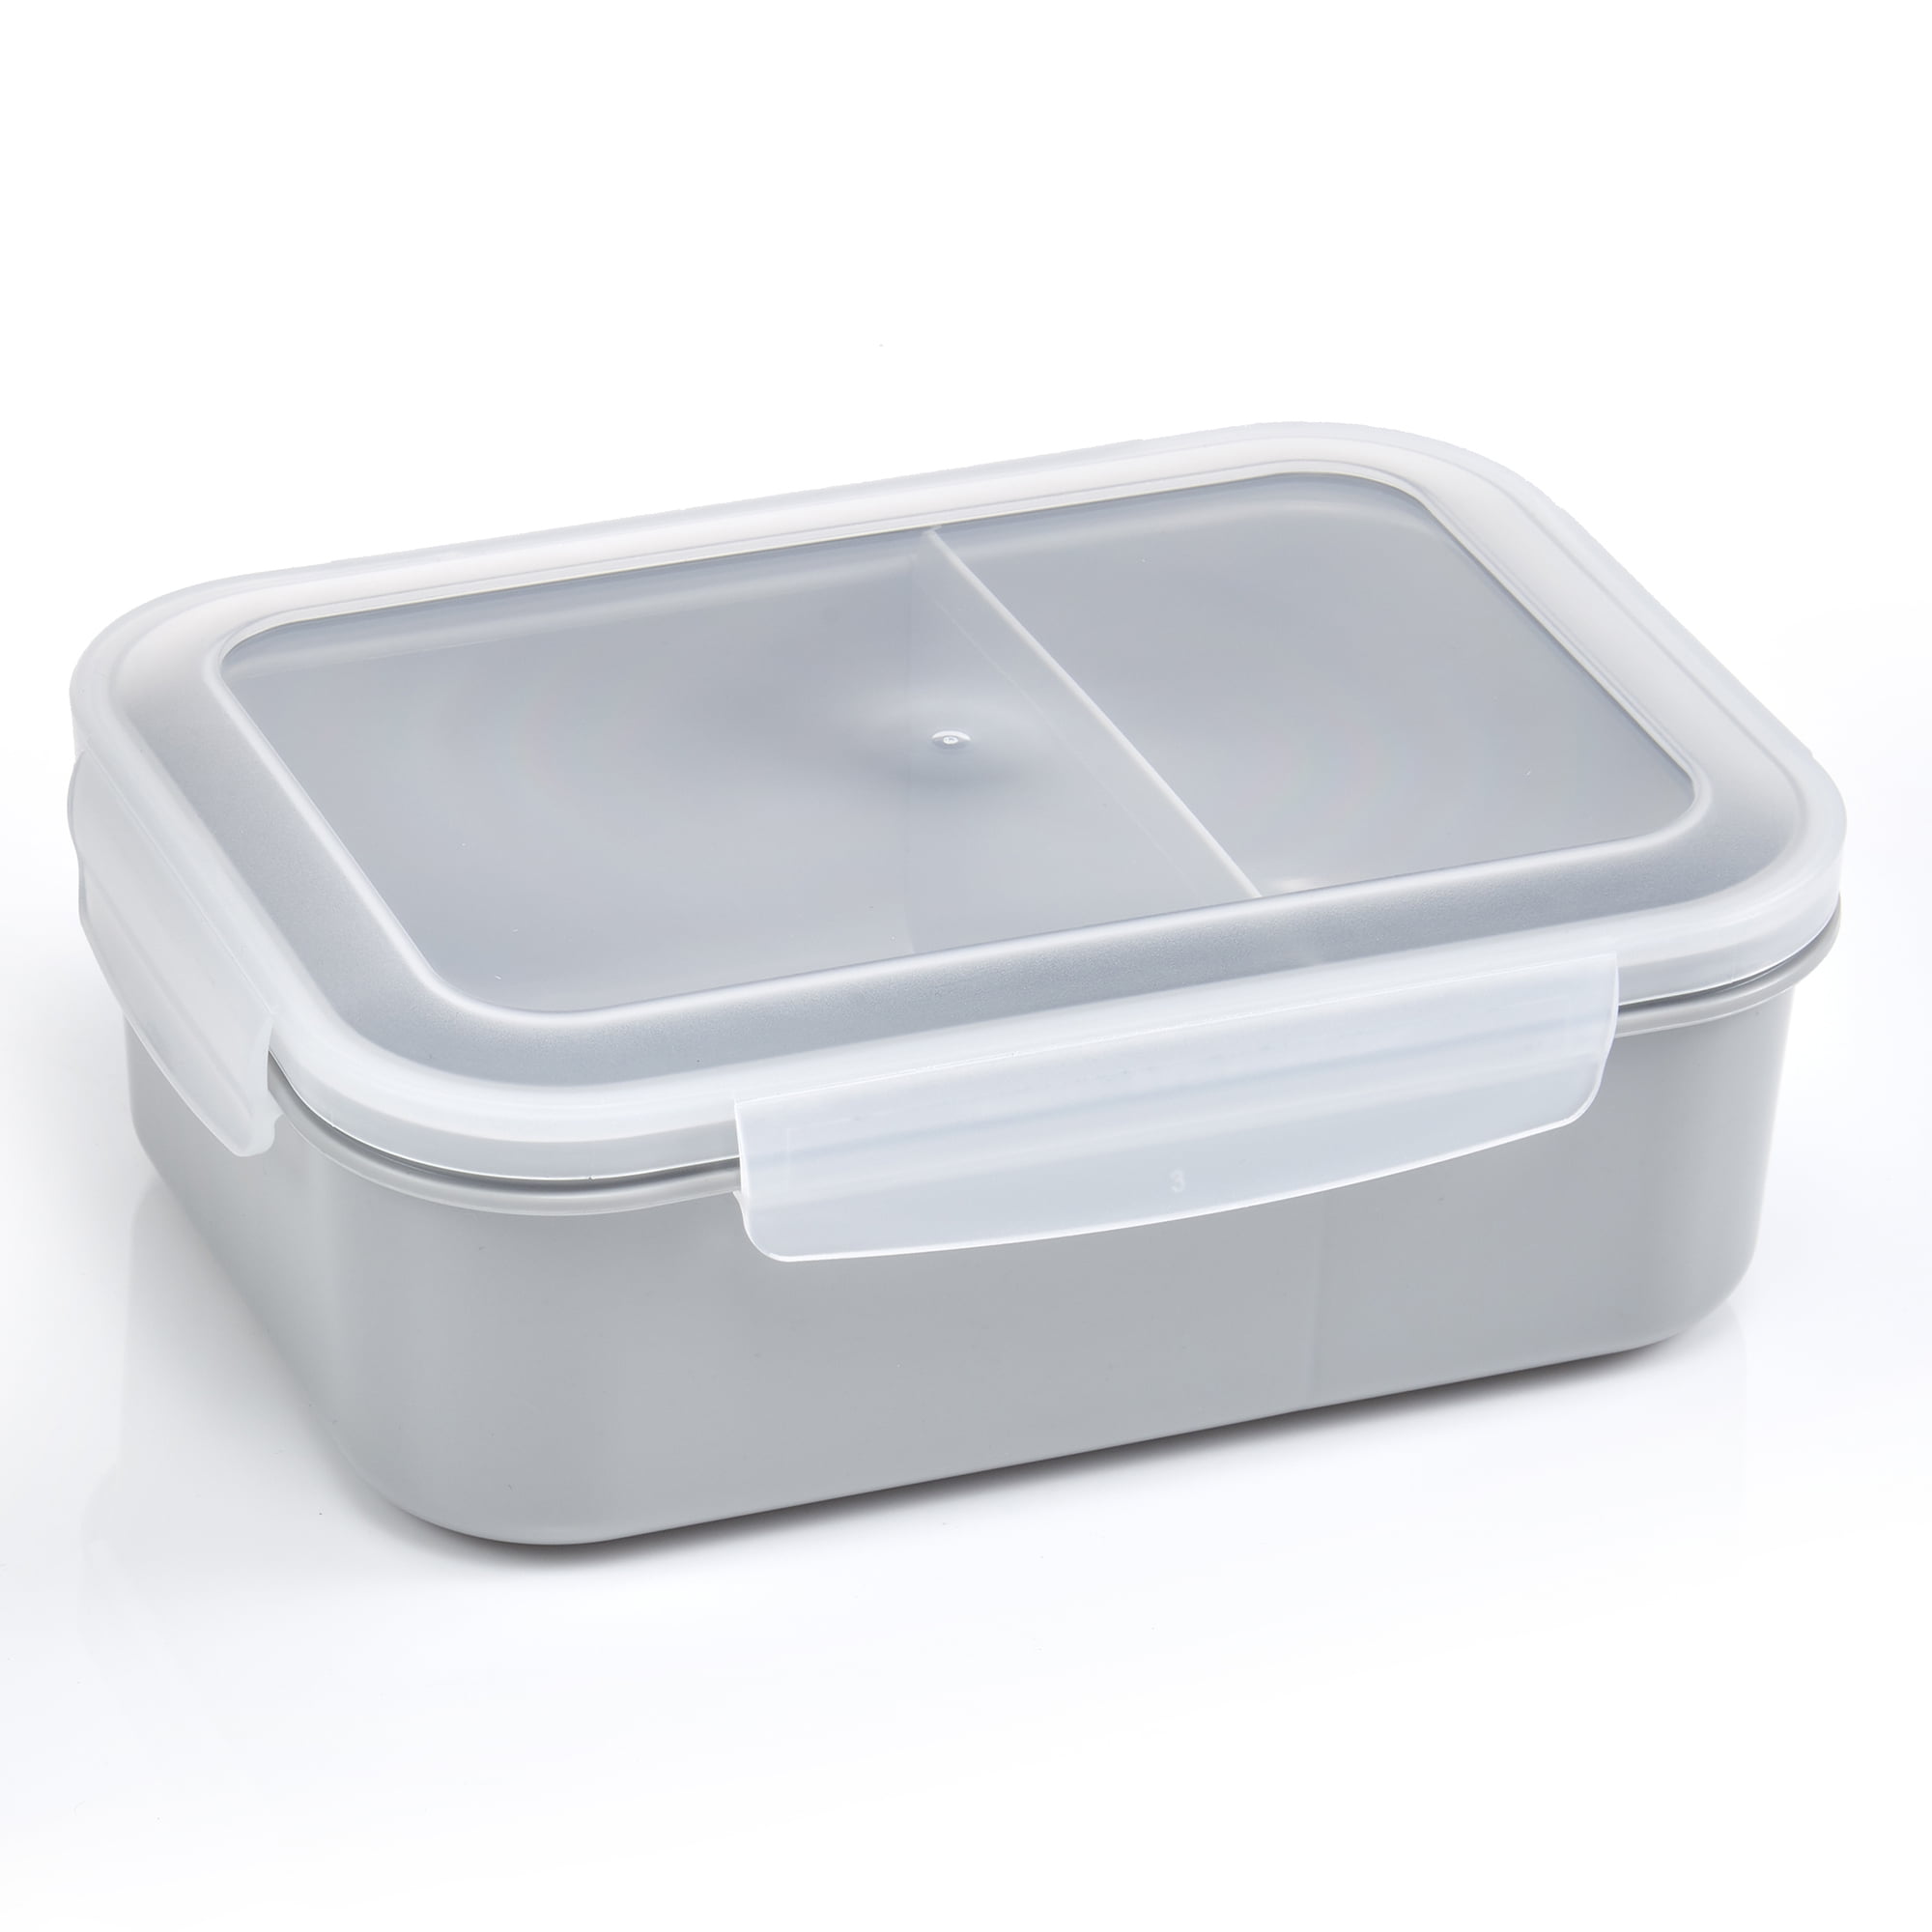 Dropship Mainstays 33 Oz Rectangular Insulated Food Container